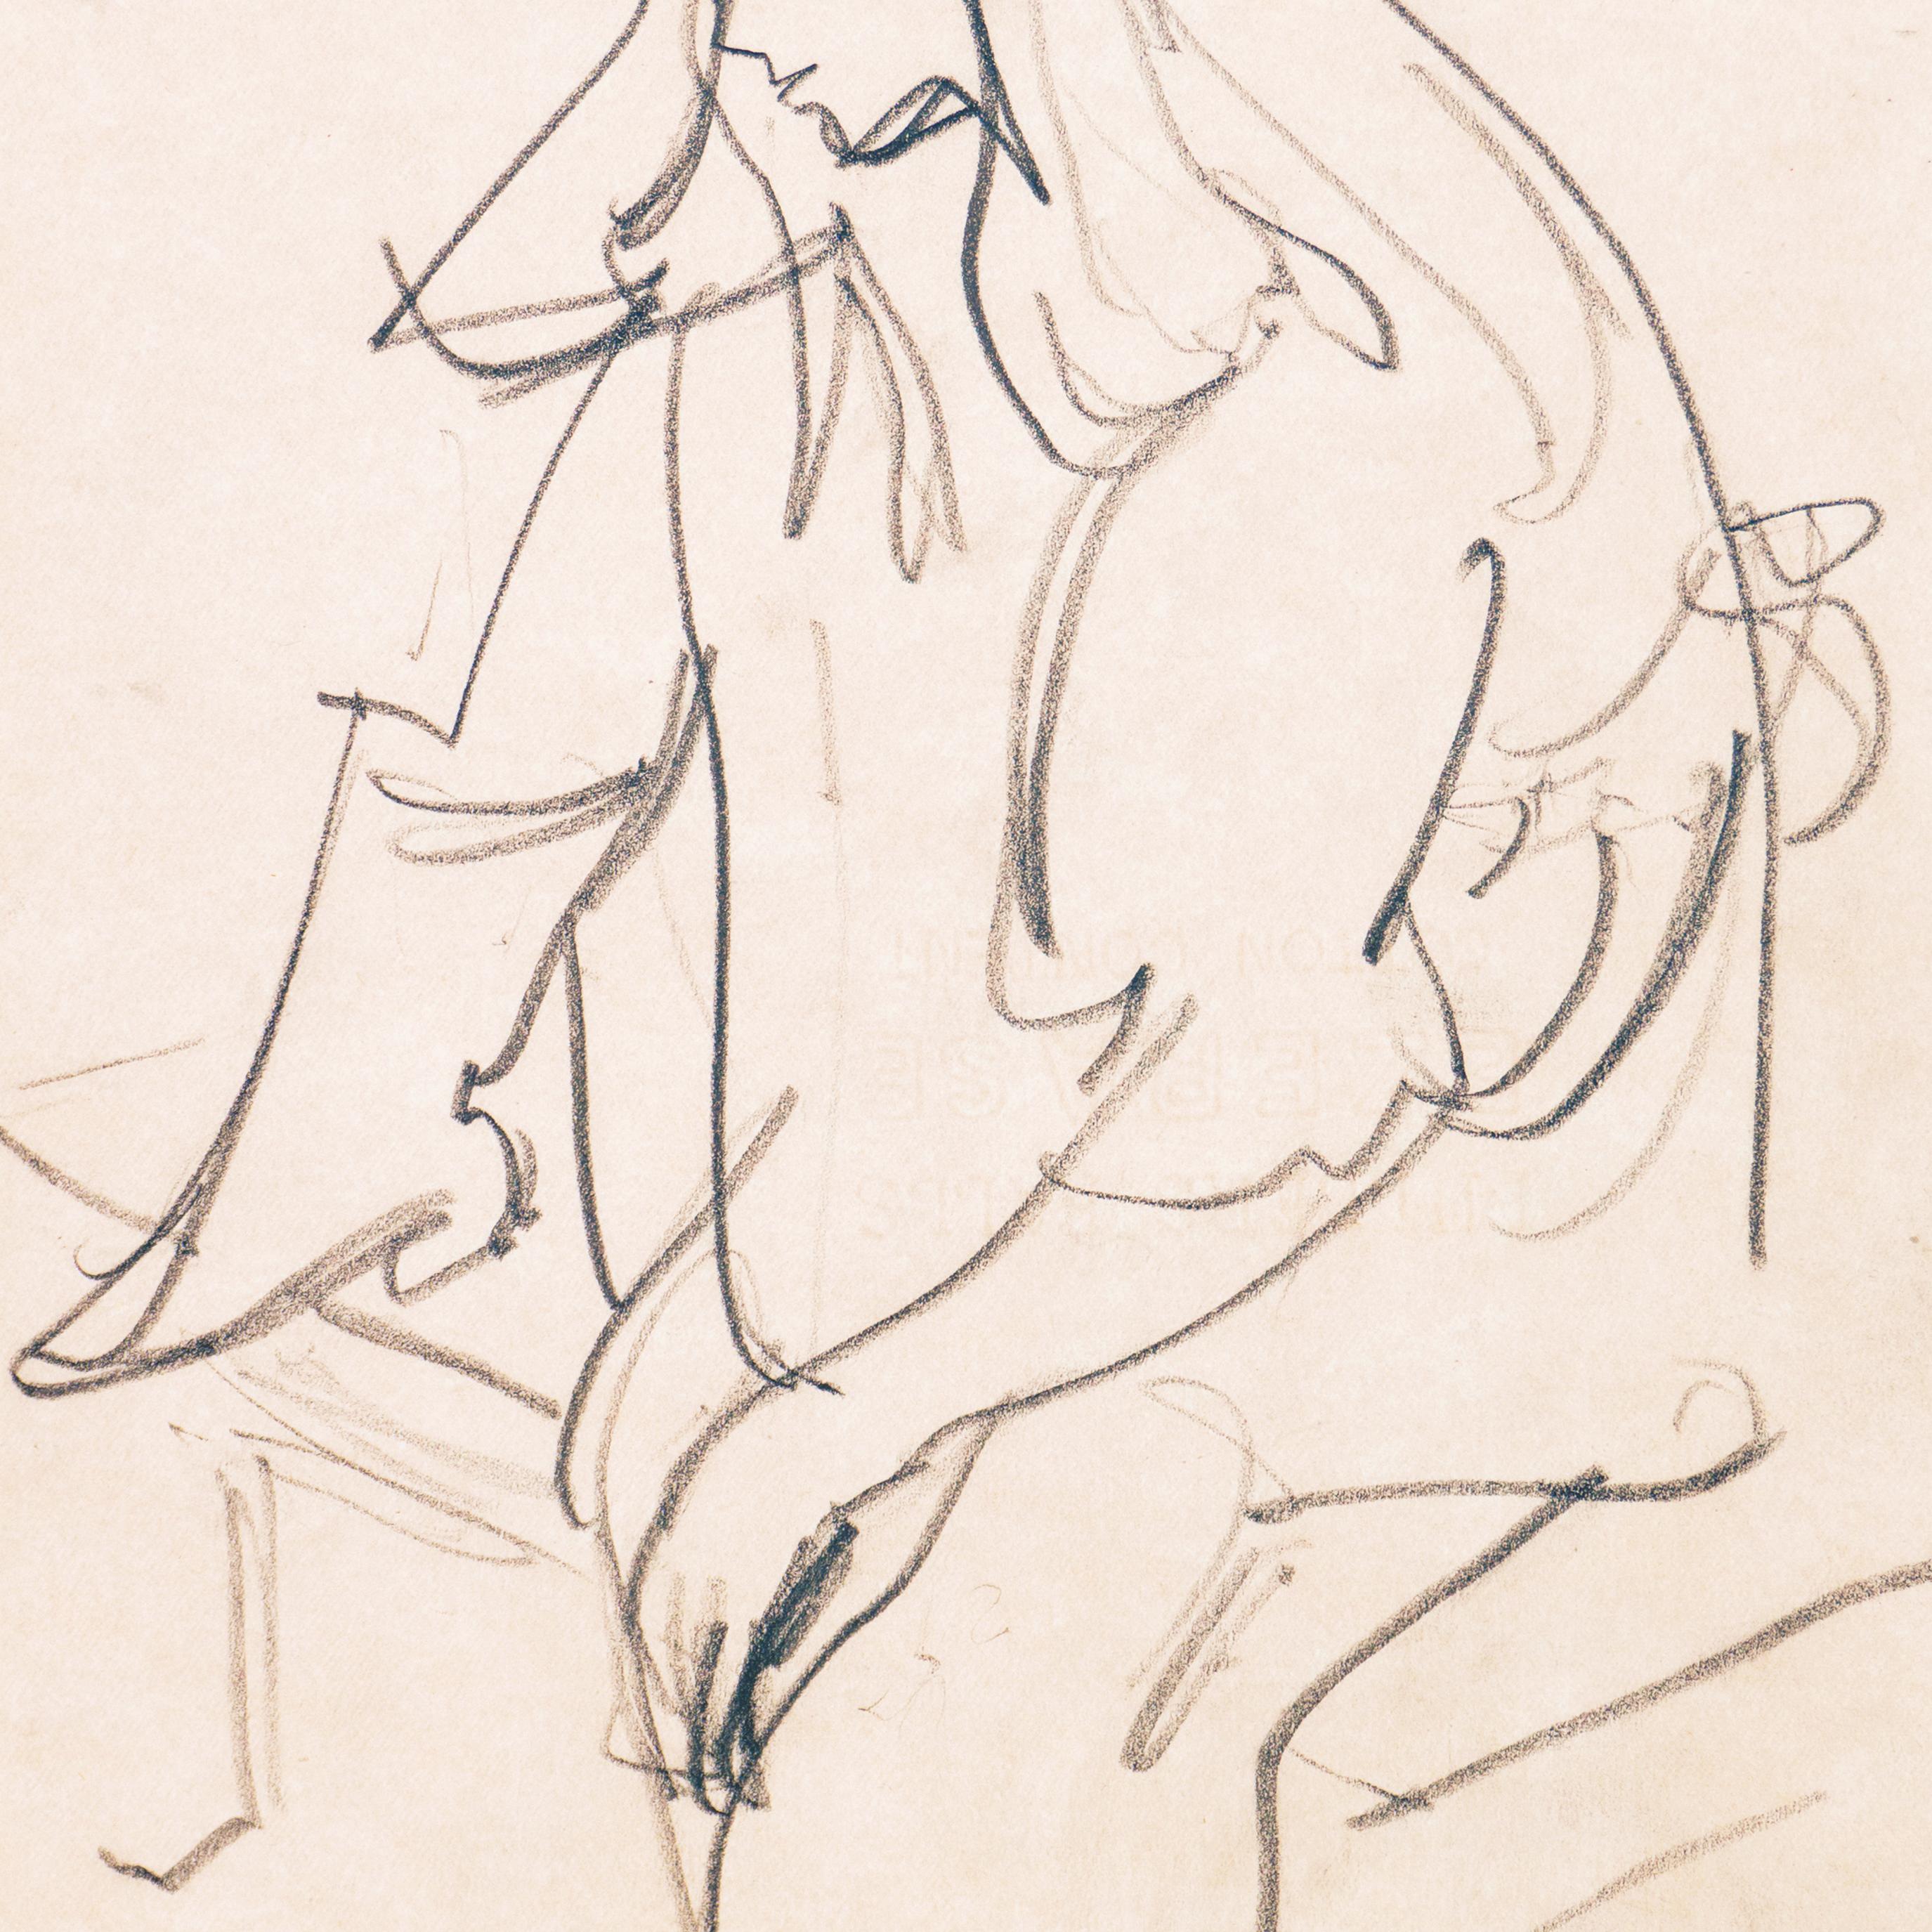 Created circa 1955 by Victor Di Gesu (American, 1914-1988) and stamped verso with certification of authenticity. 

An atmospheric and psychologically penetrating figural drawing, showing a pensive young woman wearing boots, seated on the edge of a